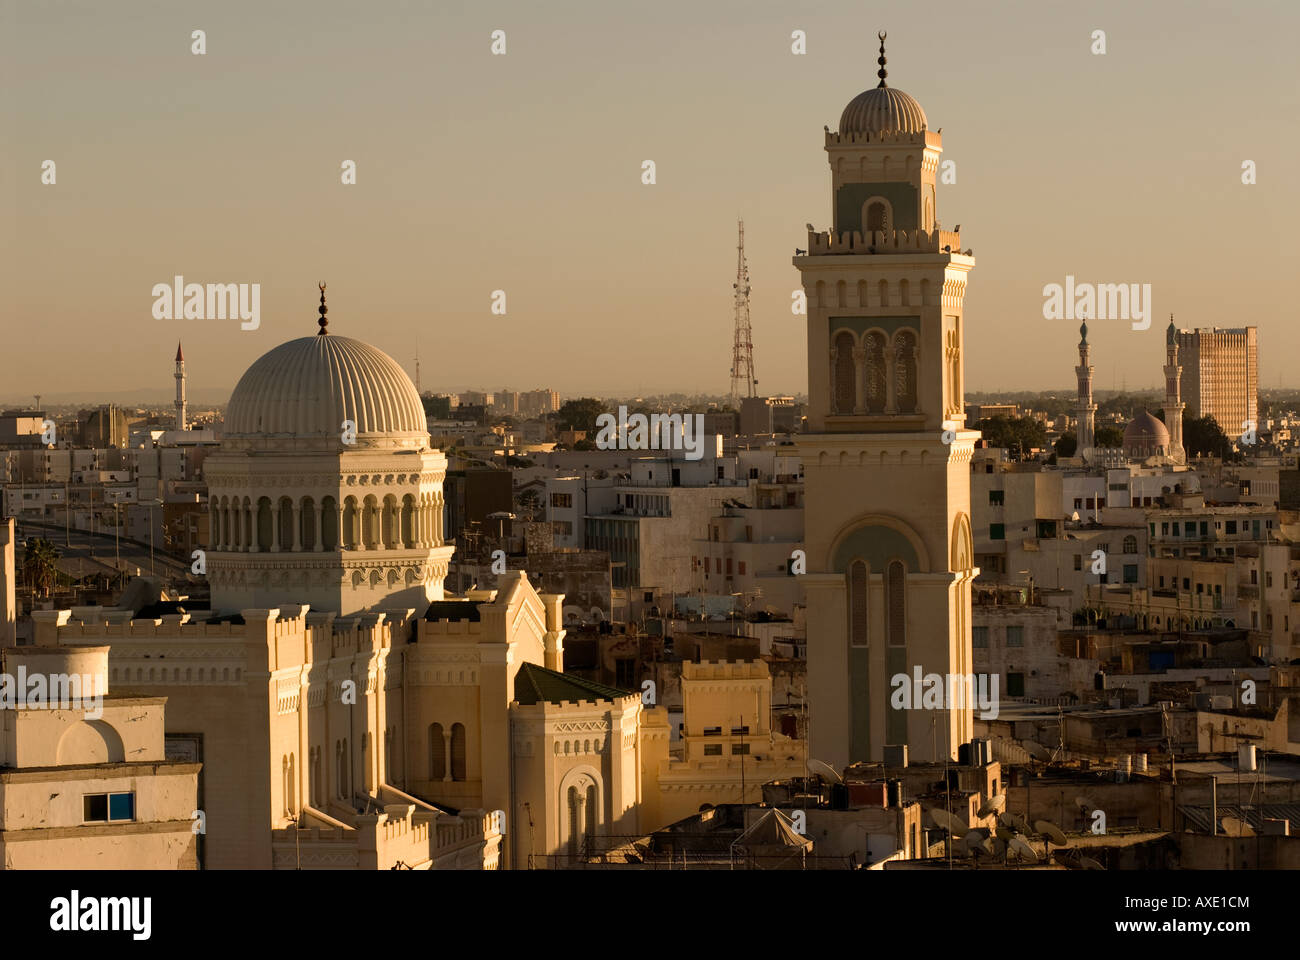 General view over the city of Tripoli showing the Masjed Jamal Abdel Nasser Mosque, Tripoli, Libya, north Africa. Stock Photo